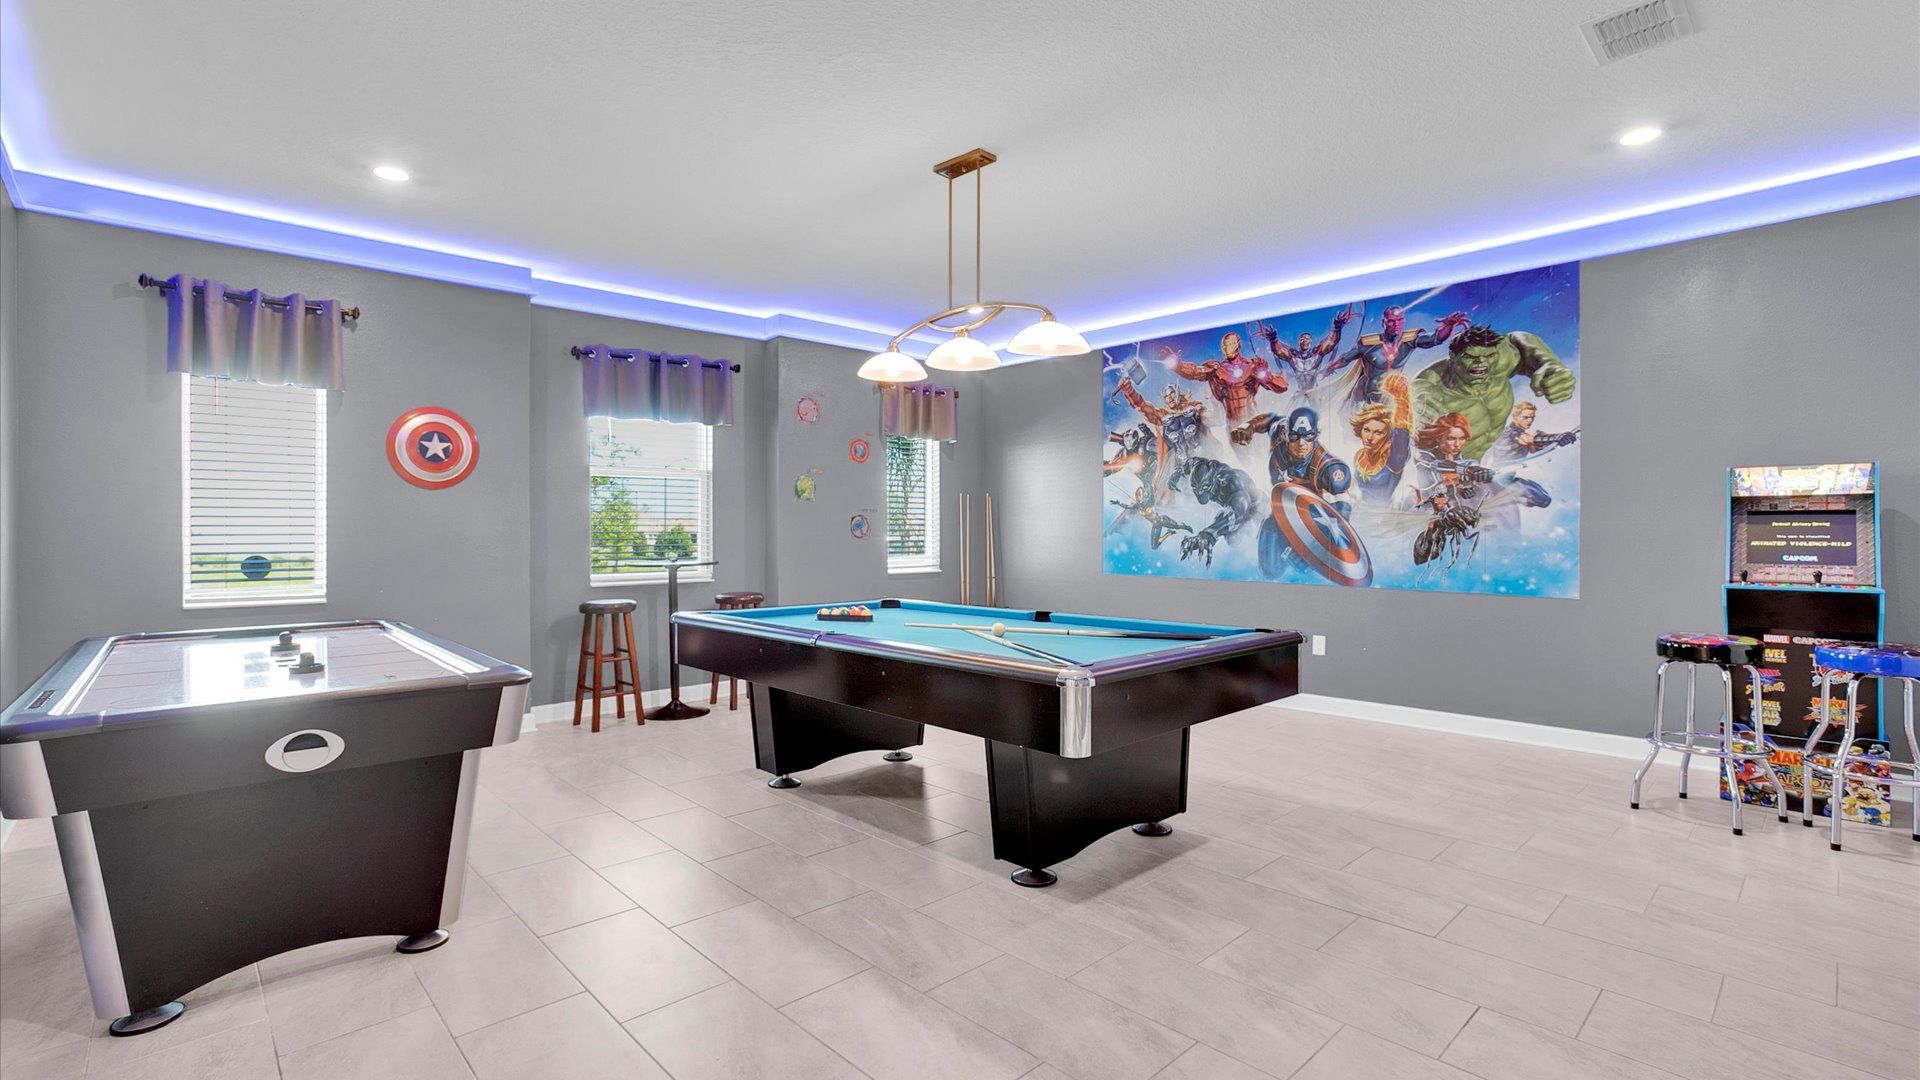 Game Room - Downstairs
Pool Table, Air Hockey
Marvel Video Arcade
Avengers Theme